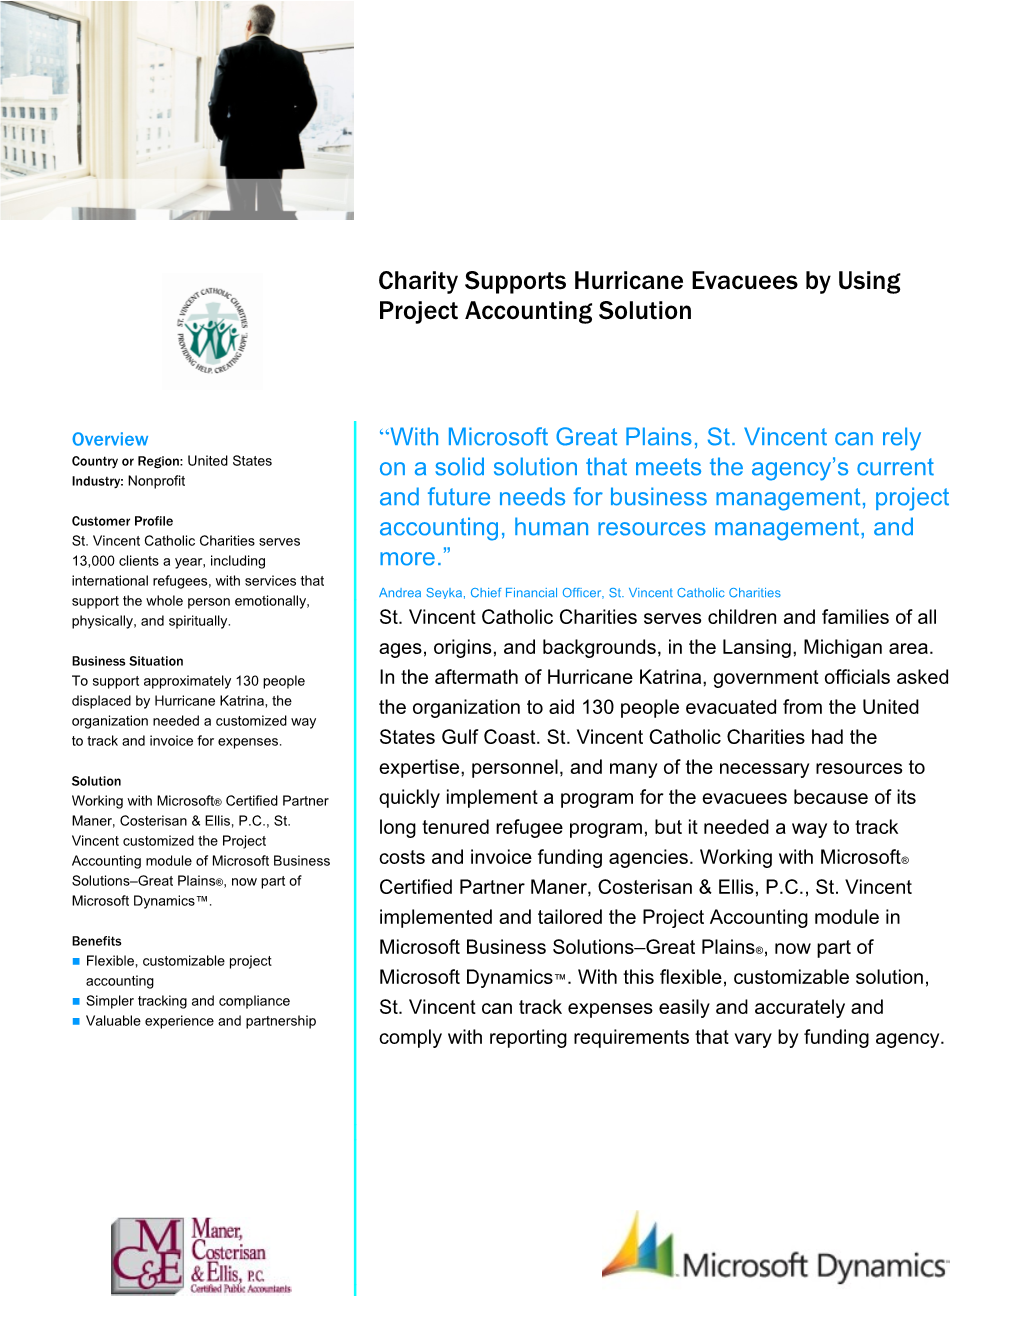 Charity Supports Hurricane Evacuees by Using Project Accounting Solution